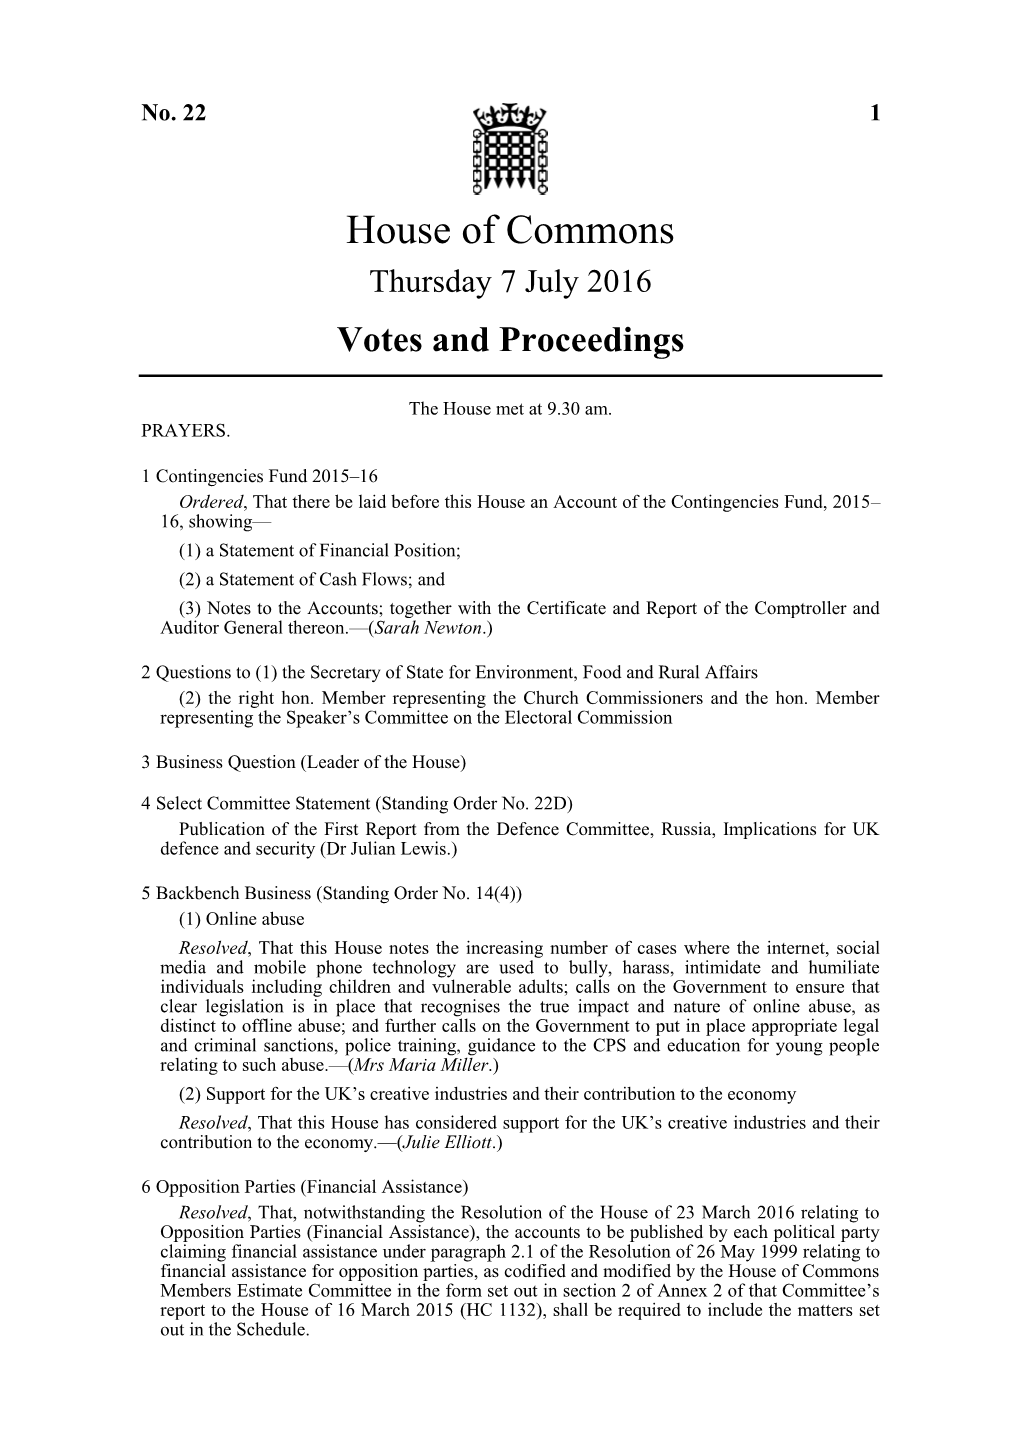 House of Commons Thursday 7 July 2016 Votes and Proceedings